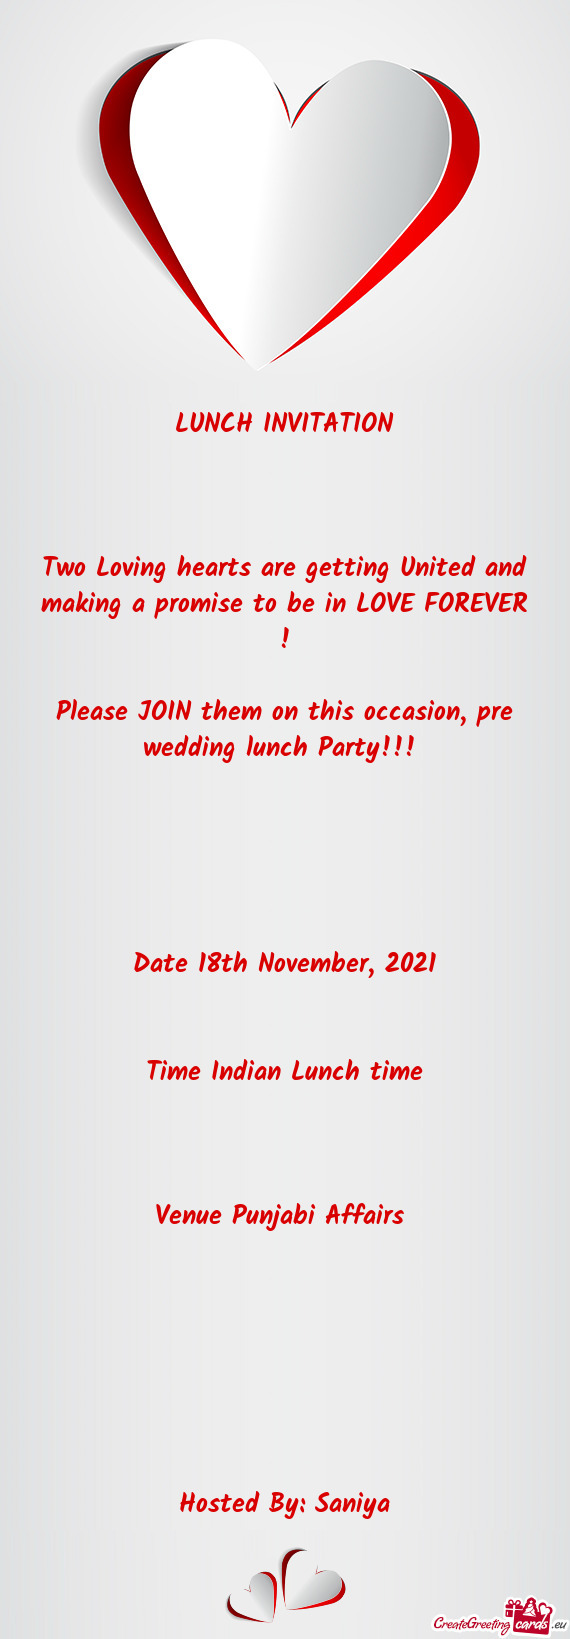 Please JOIN them on this occasion, pre wedding lunch Party